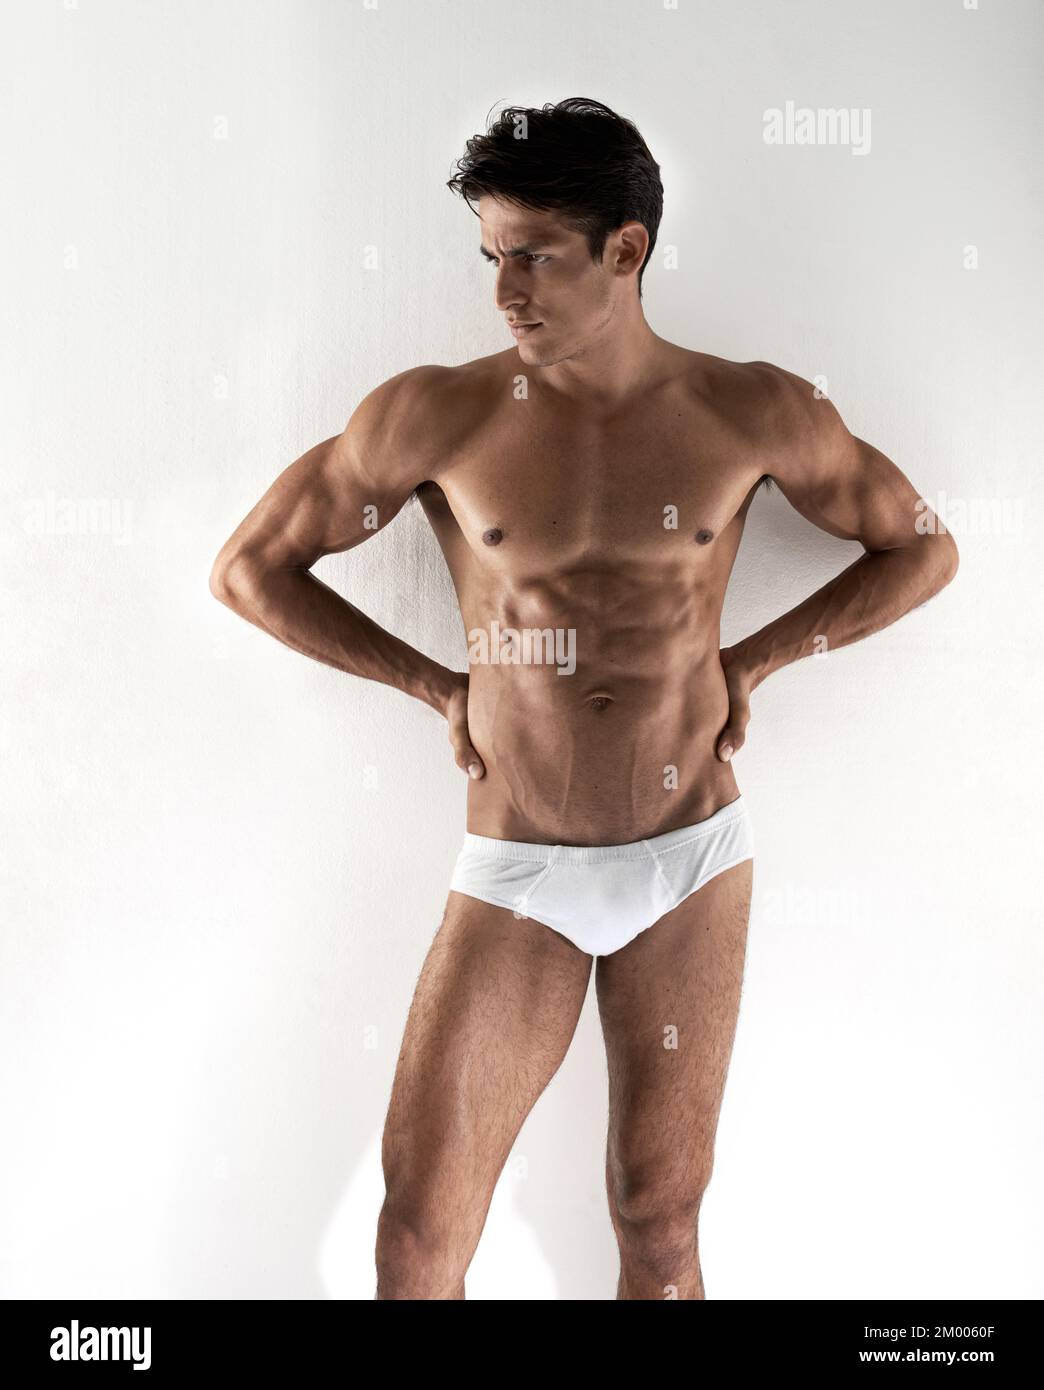 Hes got a body to die for. a handsome young man posing in his underwear. Stock Photo